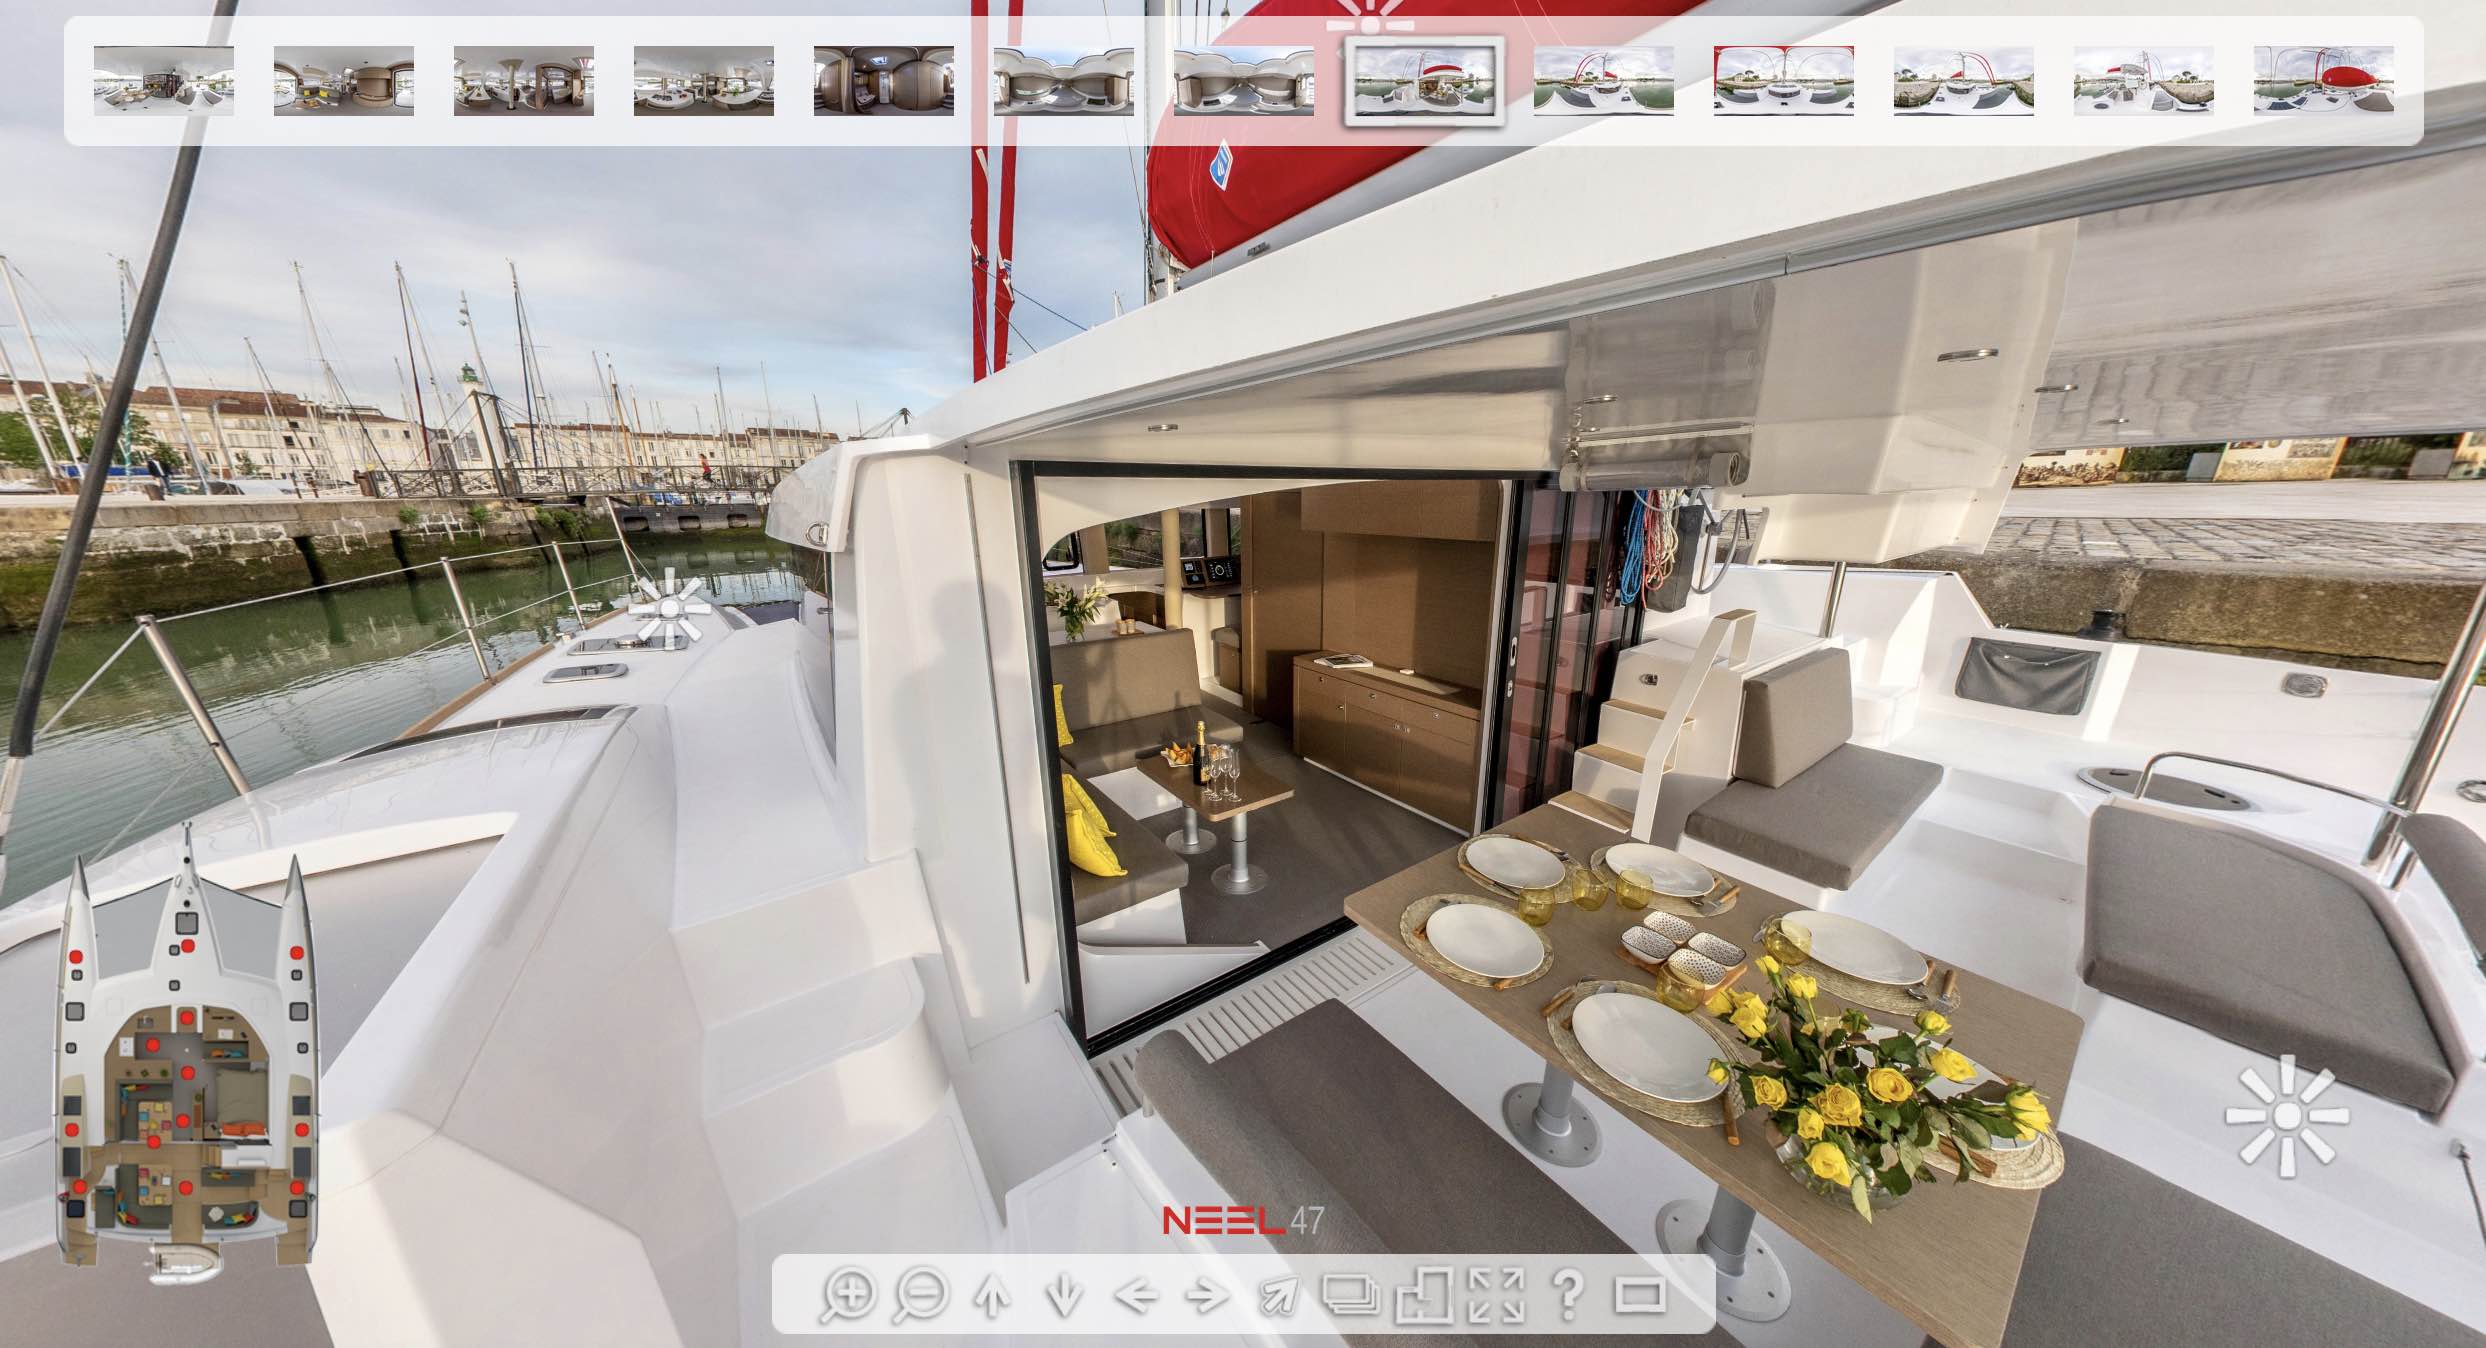 NEEL TRIMARANS AT CANNES YACHTING FESTIVAL 2022